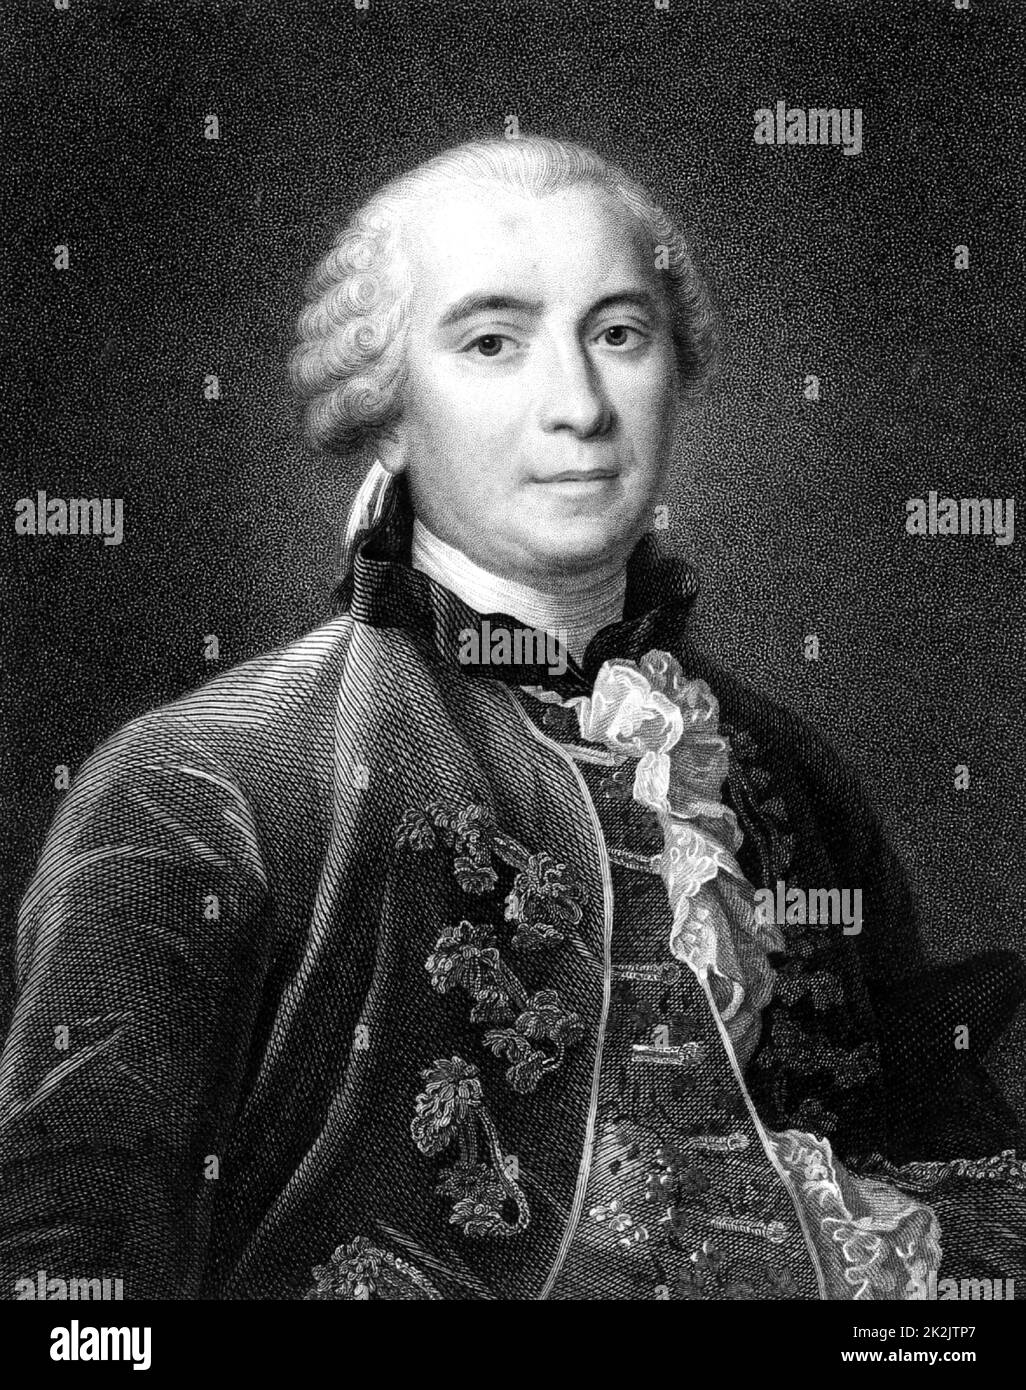 Georges-Louis Leclerc, Comte de Buffon (1707-88) French naturalist; author of 44 volume 'Histoire Naturelle' 1749-67. Stipple engraving after portrait of Henri Drouais painted 1761. From 'The Gallery of Portraits' by Charles Knight (London, 1833). Stock Photo